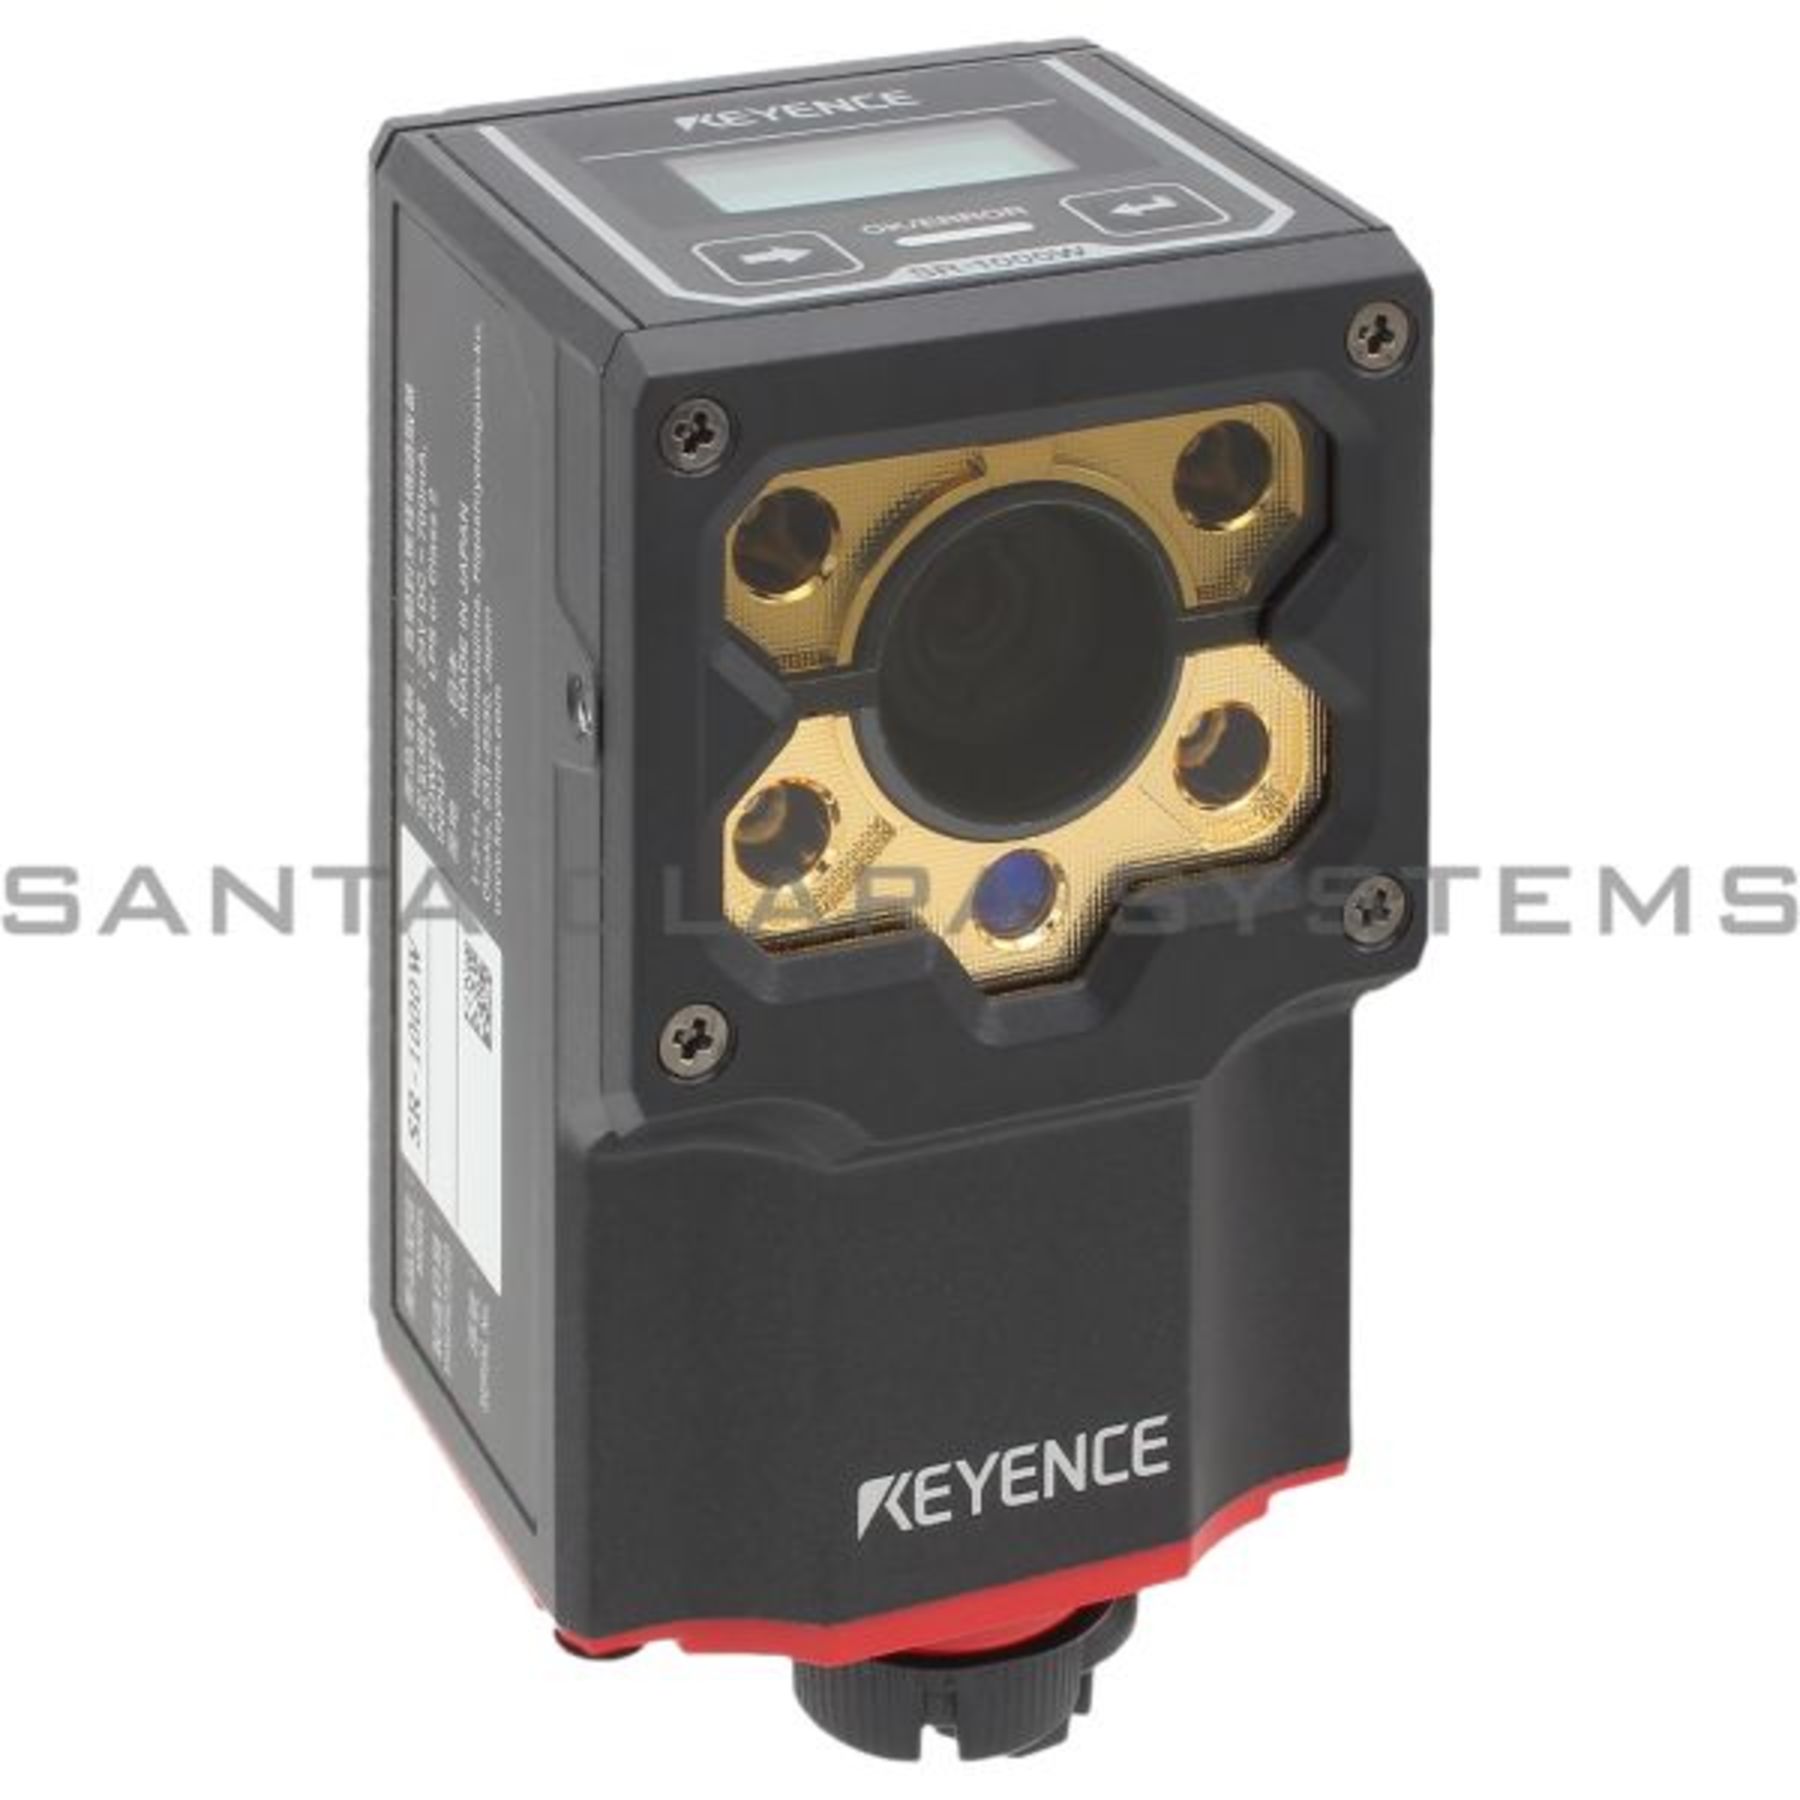 Keyence Autofocus 1D and 2D Code Reader SR-1000W In-Stock. Ships